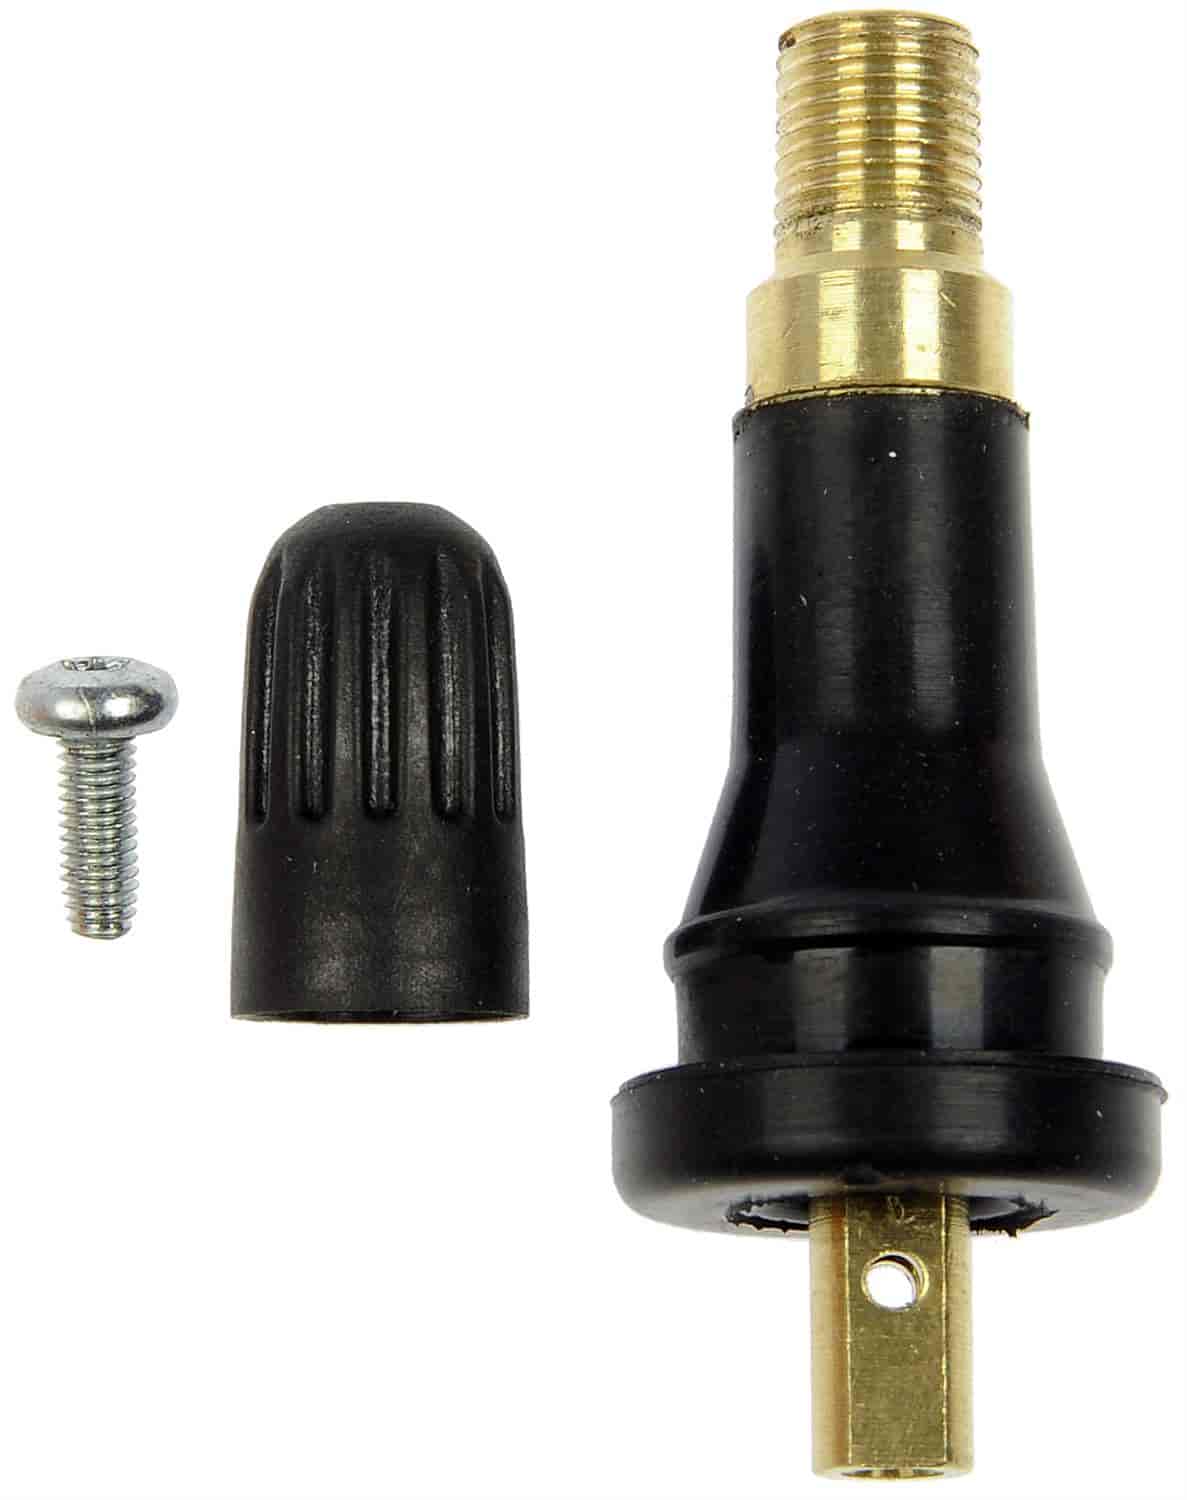 TPMS Service Kit Rubber Snap-In Valve Stem with